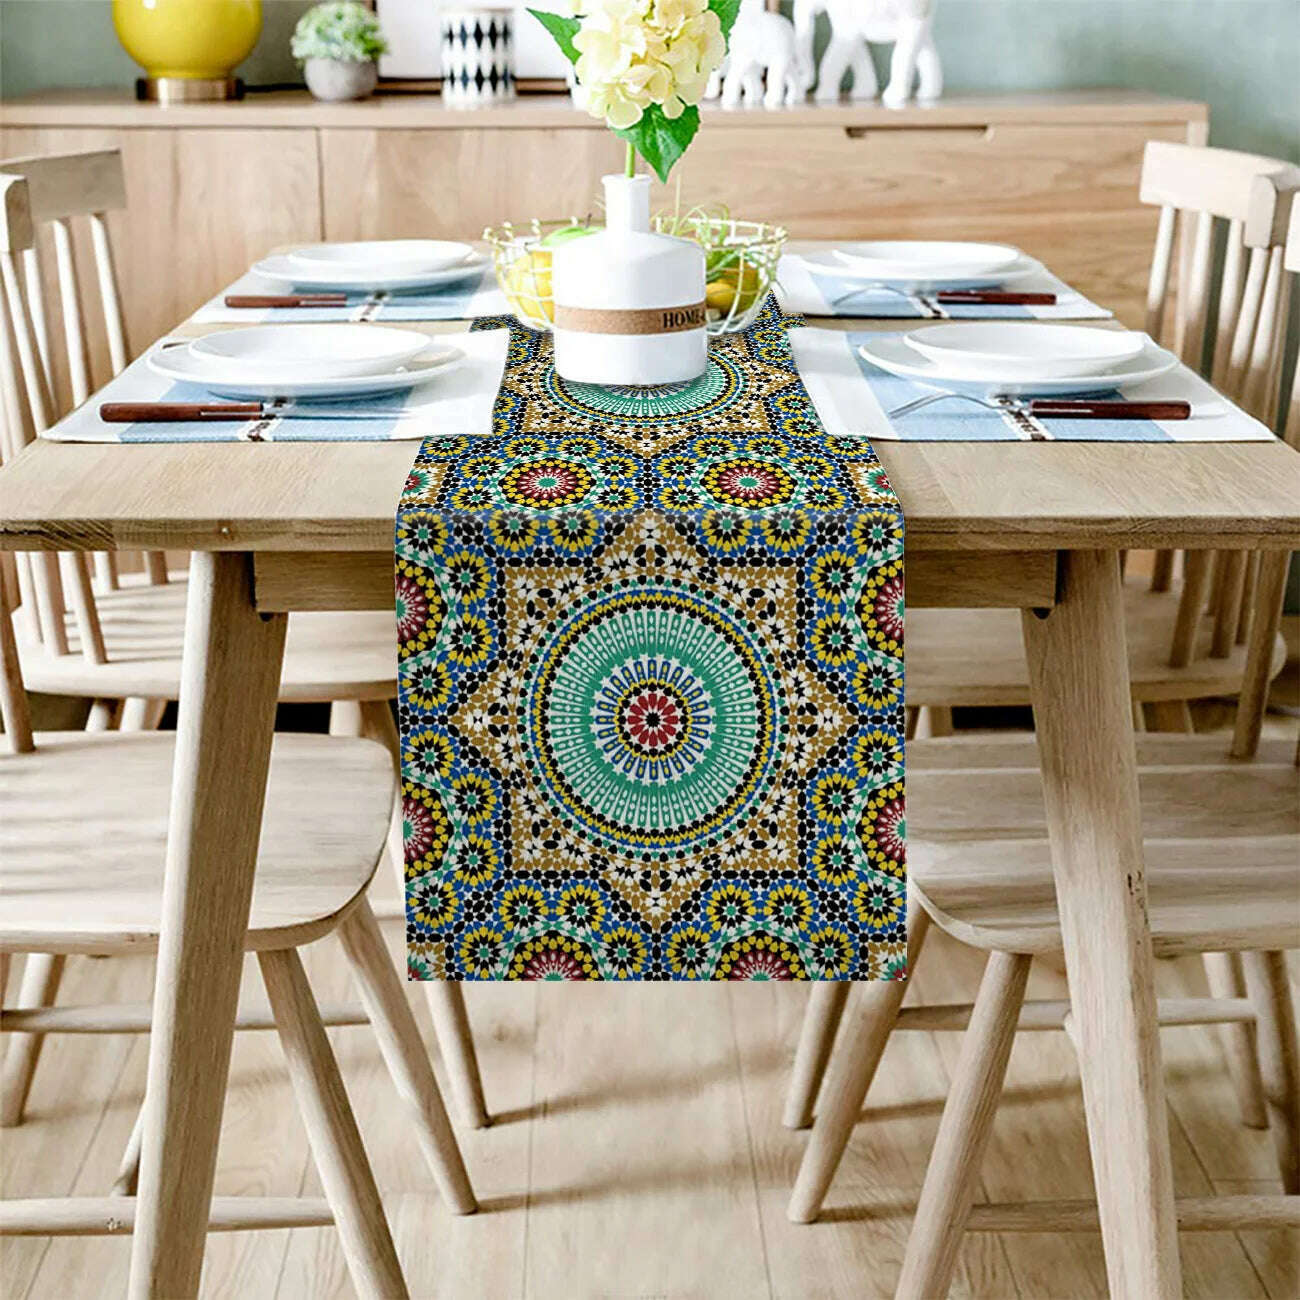 KIMLUD, Linen Burlap Table Runner Colorful Morocco Flowers Islam Arabesque Kitchen Table Runners Dinner Party Wedding Events Decor, KIMLUD Womens Clothes